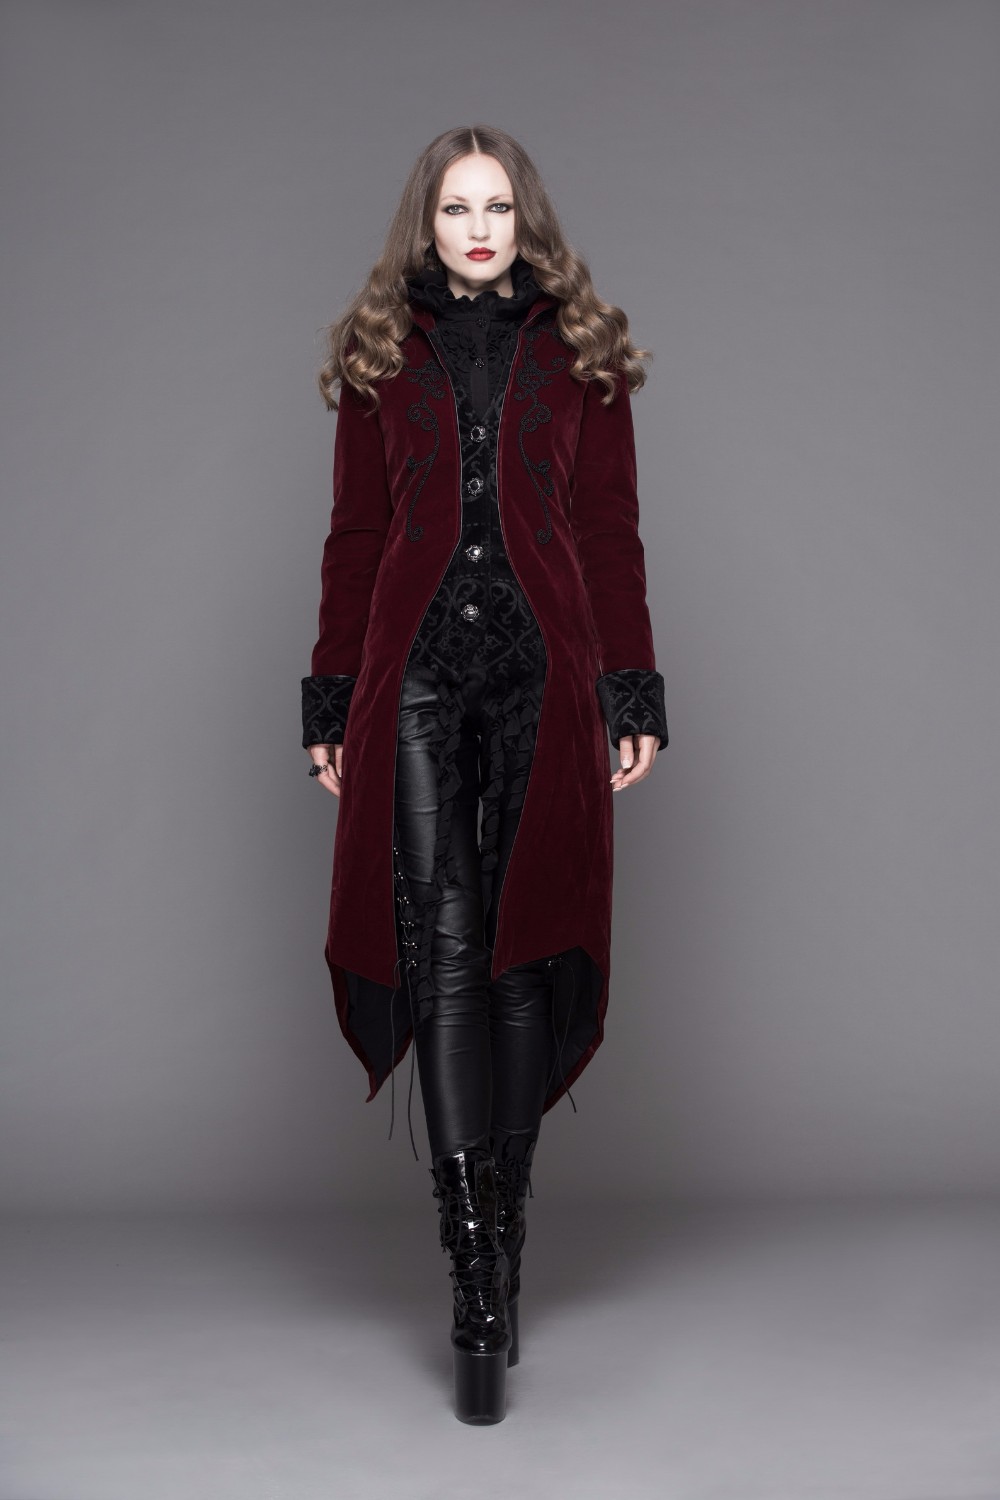 Devil-Fashion-Gothic-Long-Aristocratic-Women-Thick-Winter-Coats-Steampunk-Jackets-Ladies-Overcoats-W-32773532328